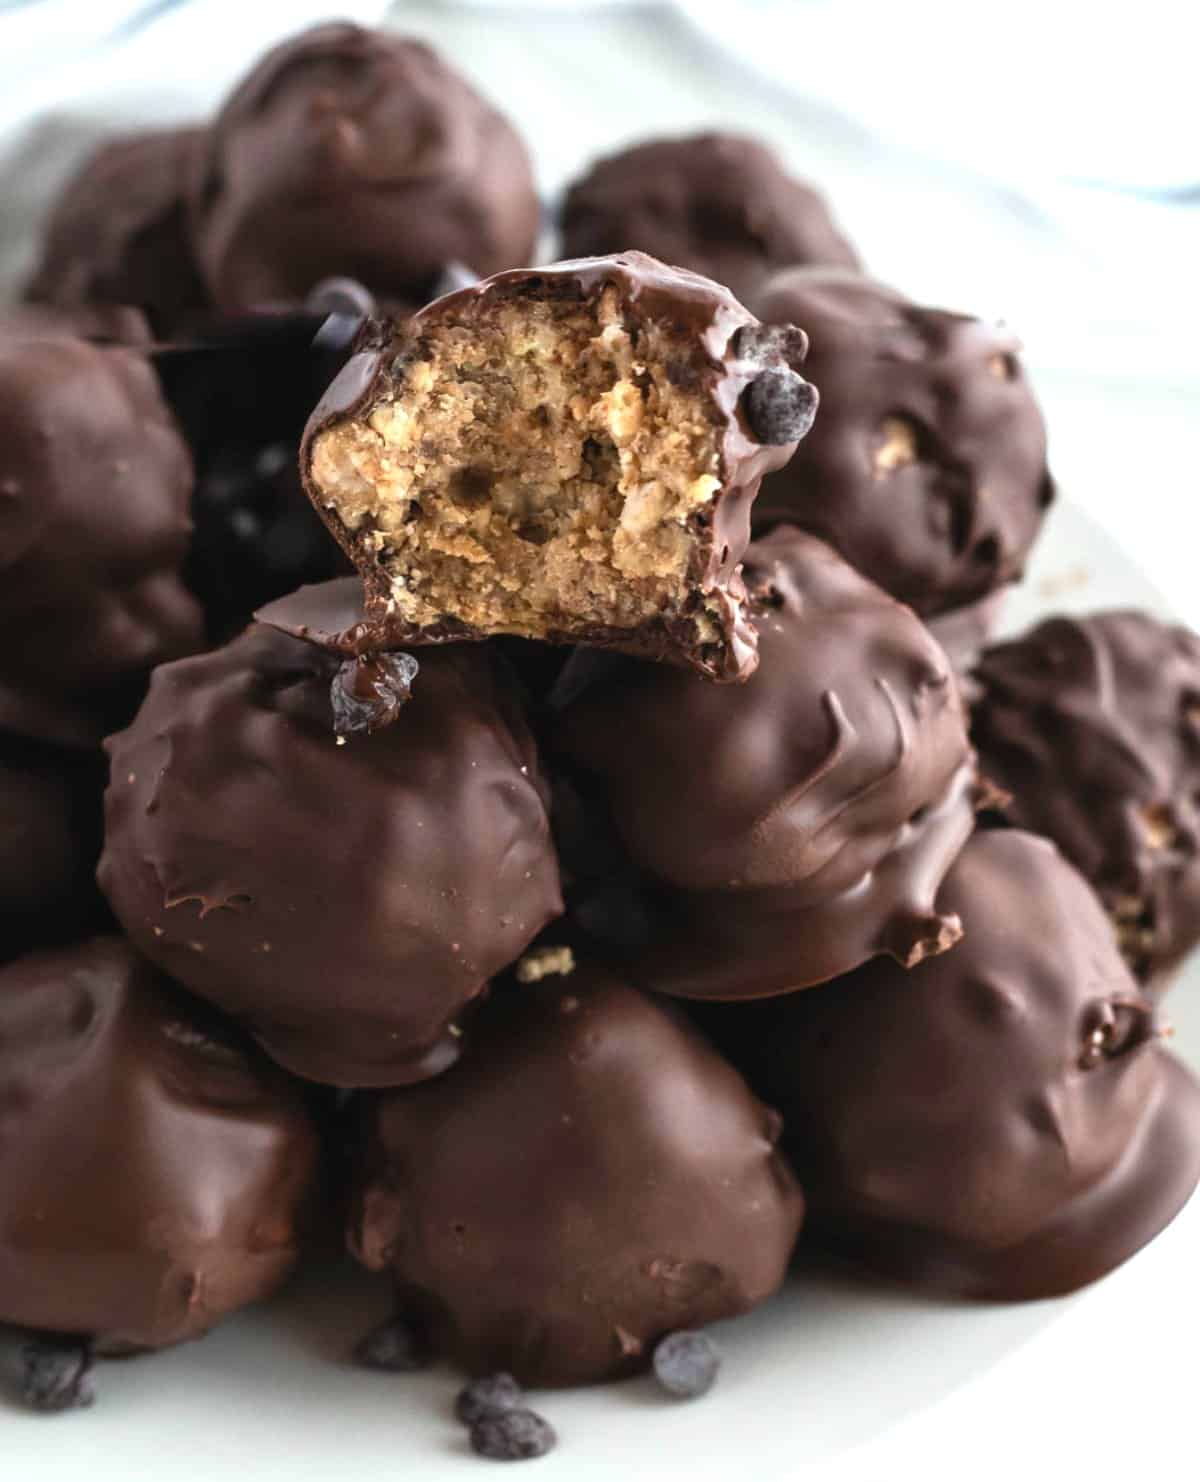 A pile of the no bake recipe showing the chocolate covered candy treats against a white background. A bite is taken out of the top ball to show the crunchy inside.